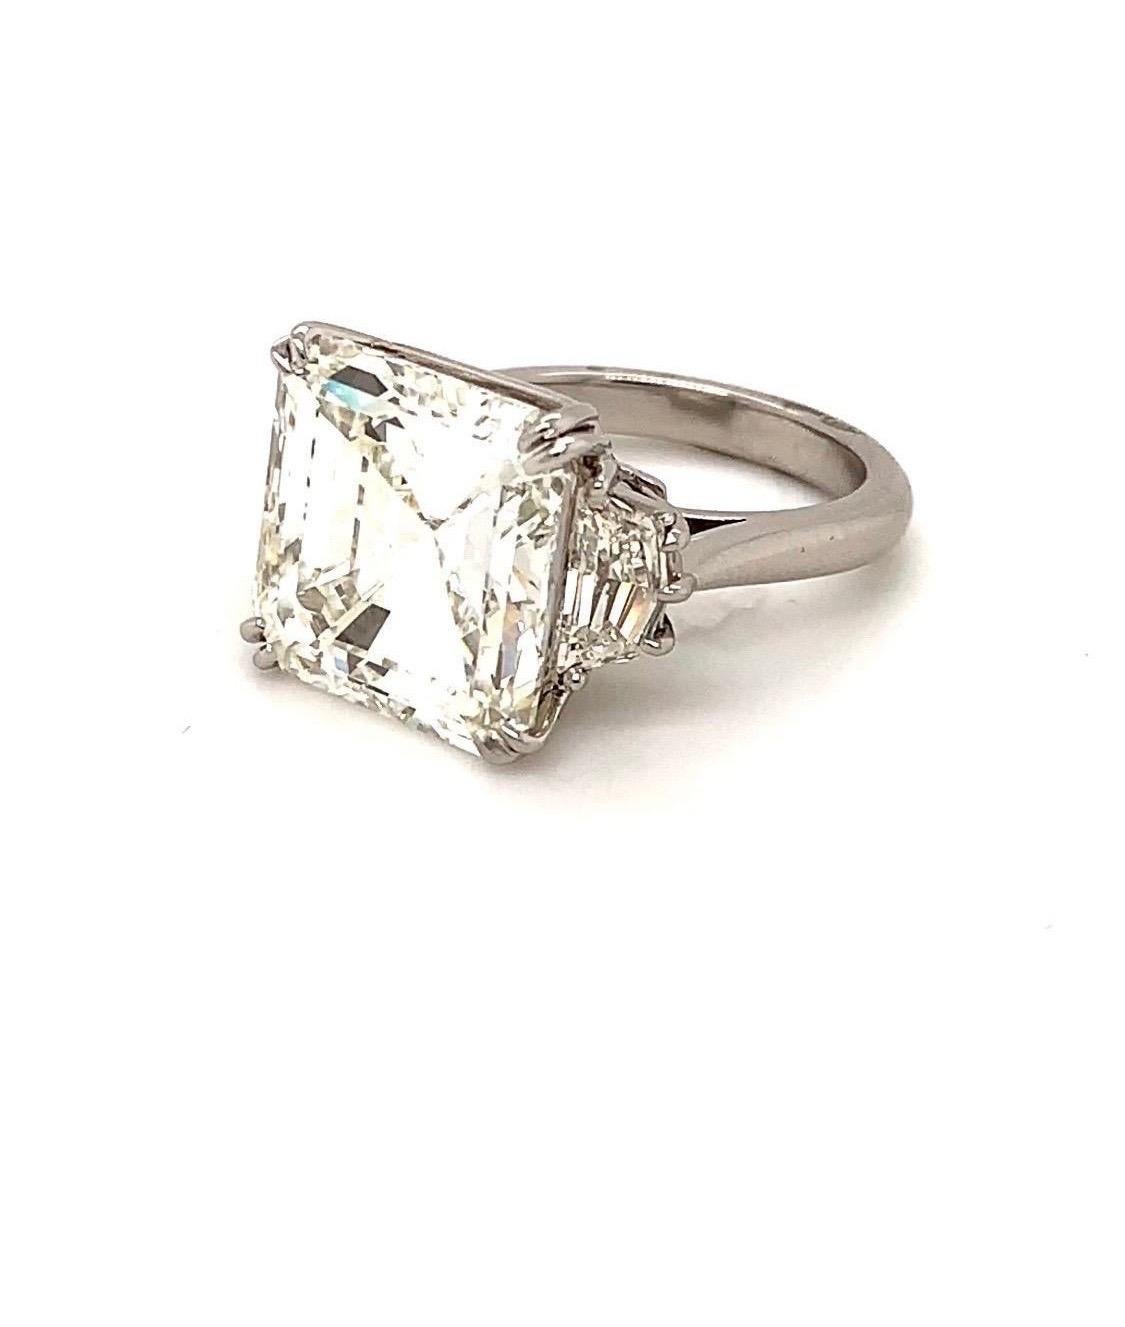 This magnificent GIA Certified 15 carat asscher cut diamond engagement ring is as full of life and luster as a gemstone can get. Mounted in a handmade platinum setting with two side stones, this ring is simply extraordinary. The diamond is graded I